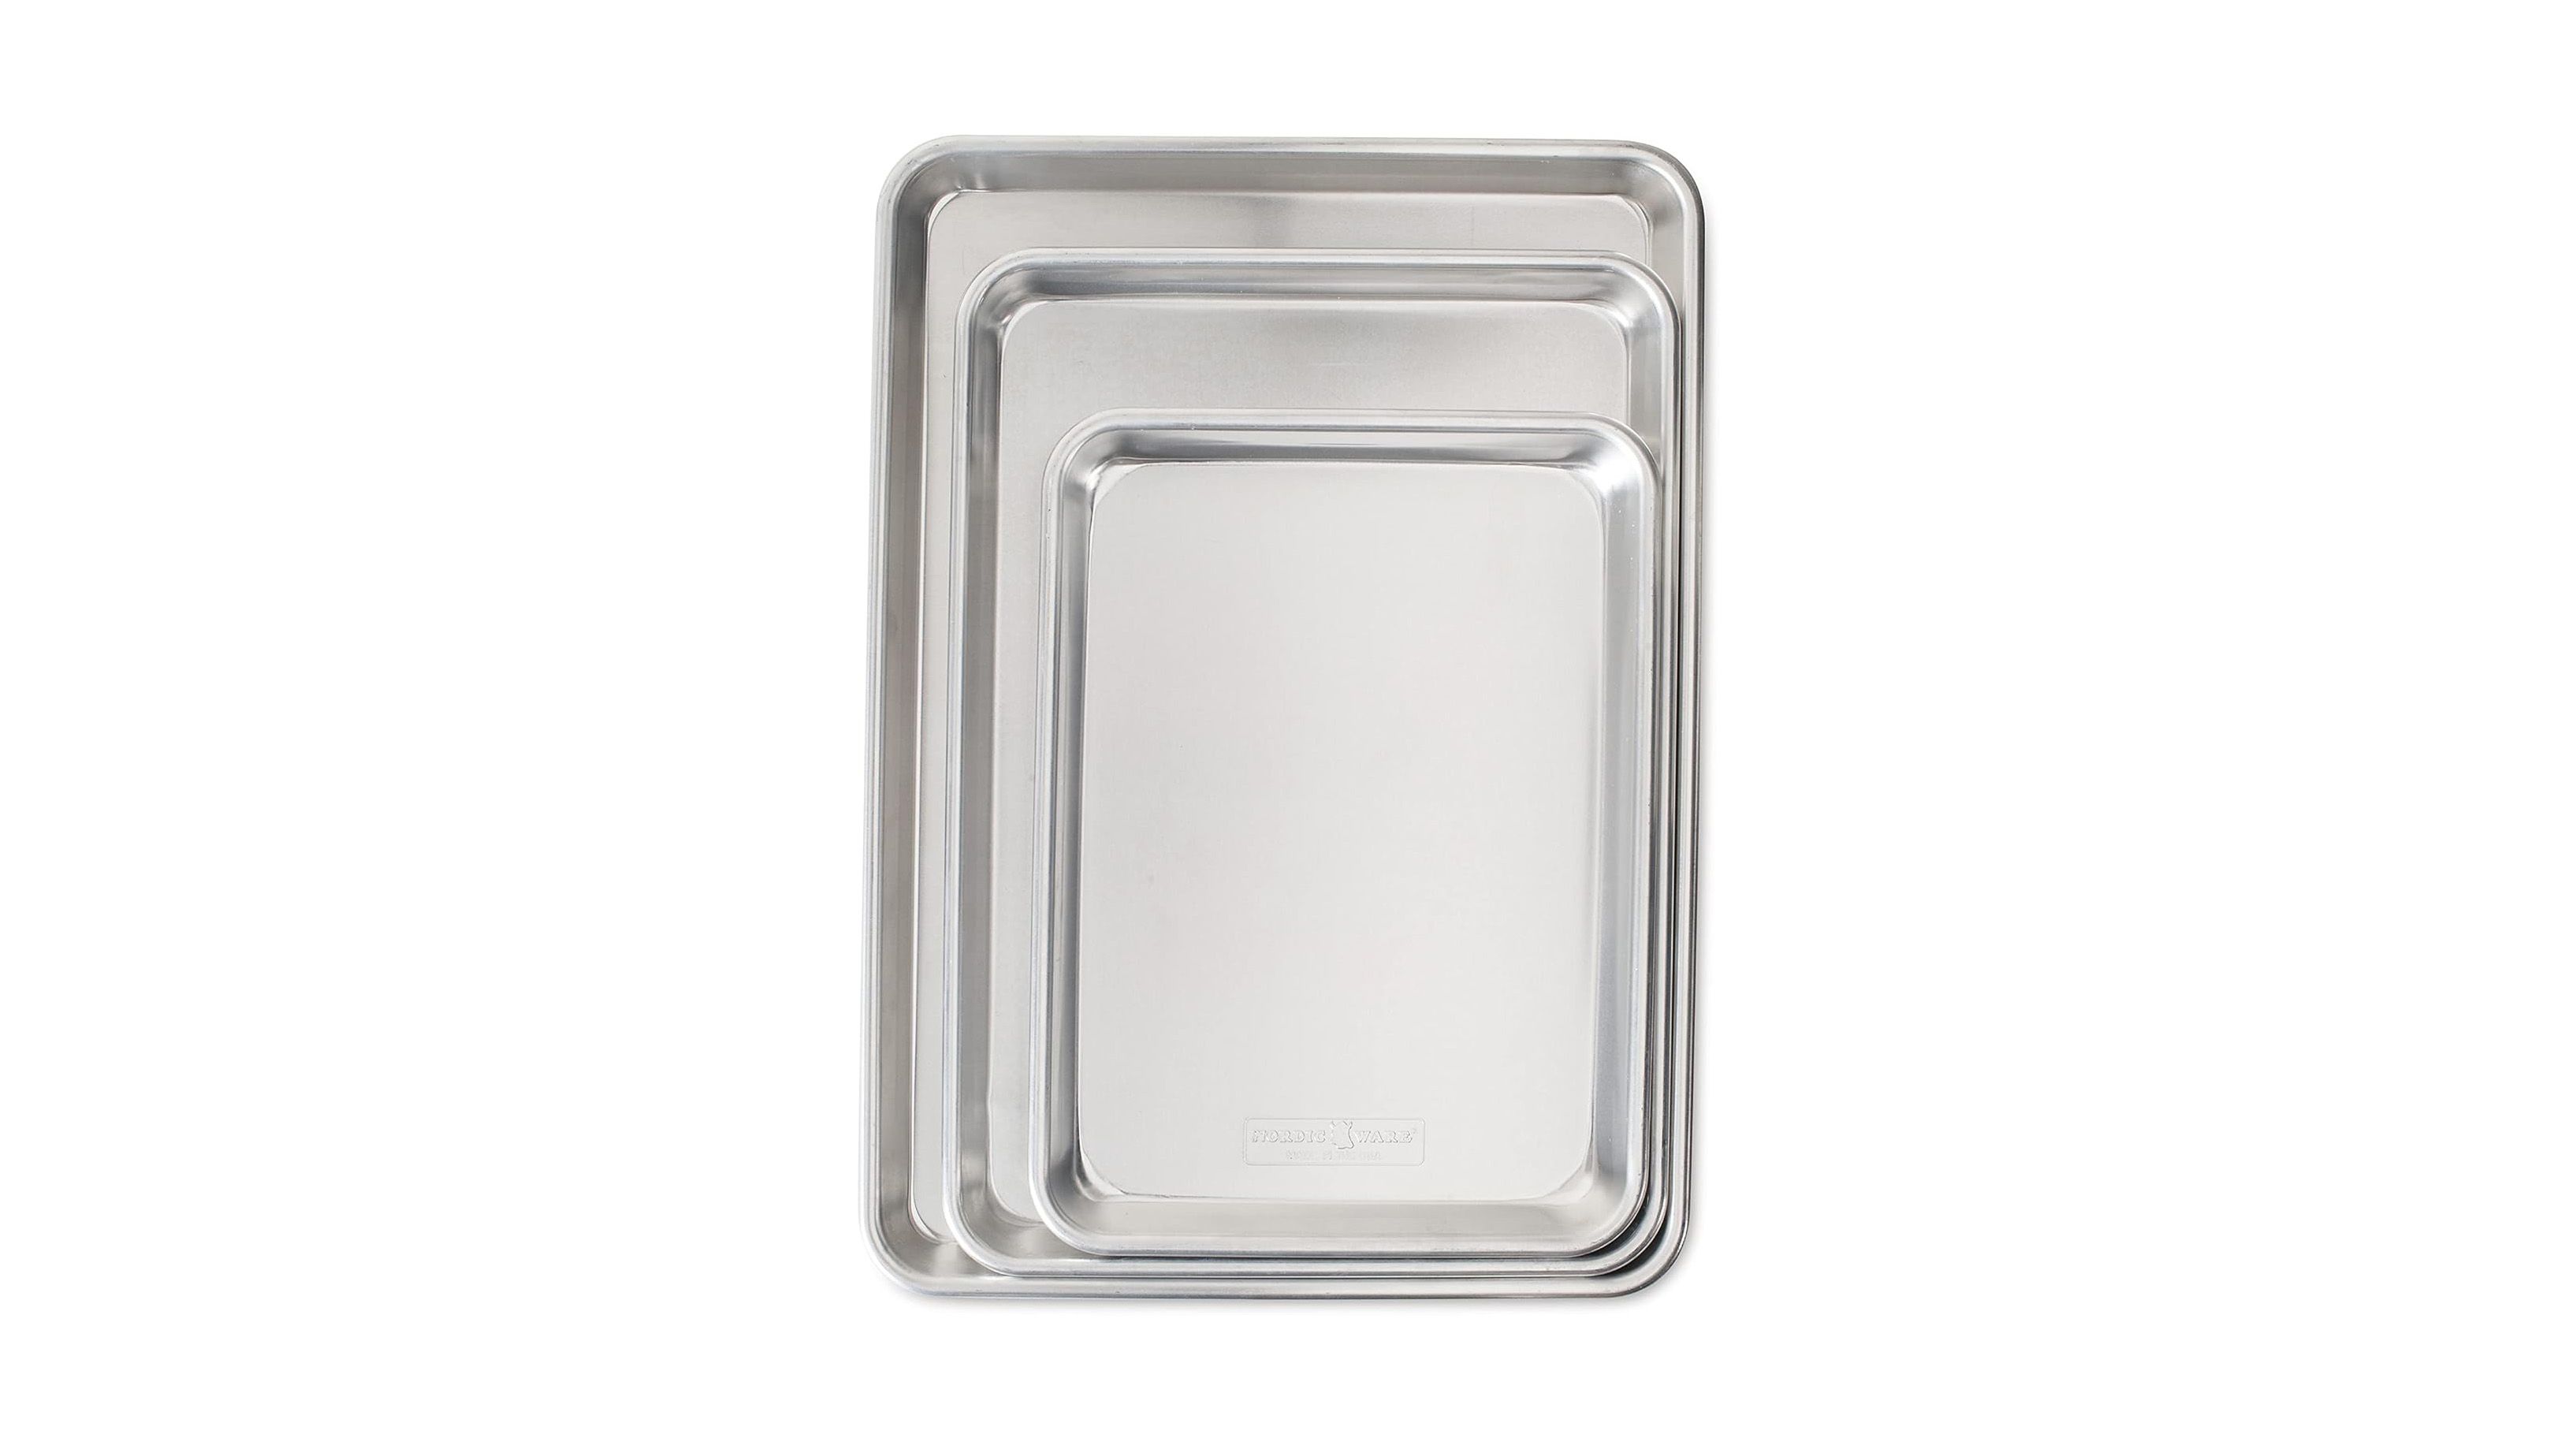 Nordic Ware Naturals 9 inch Square Cake Pan with Lid - The Tree & Vine